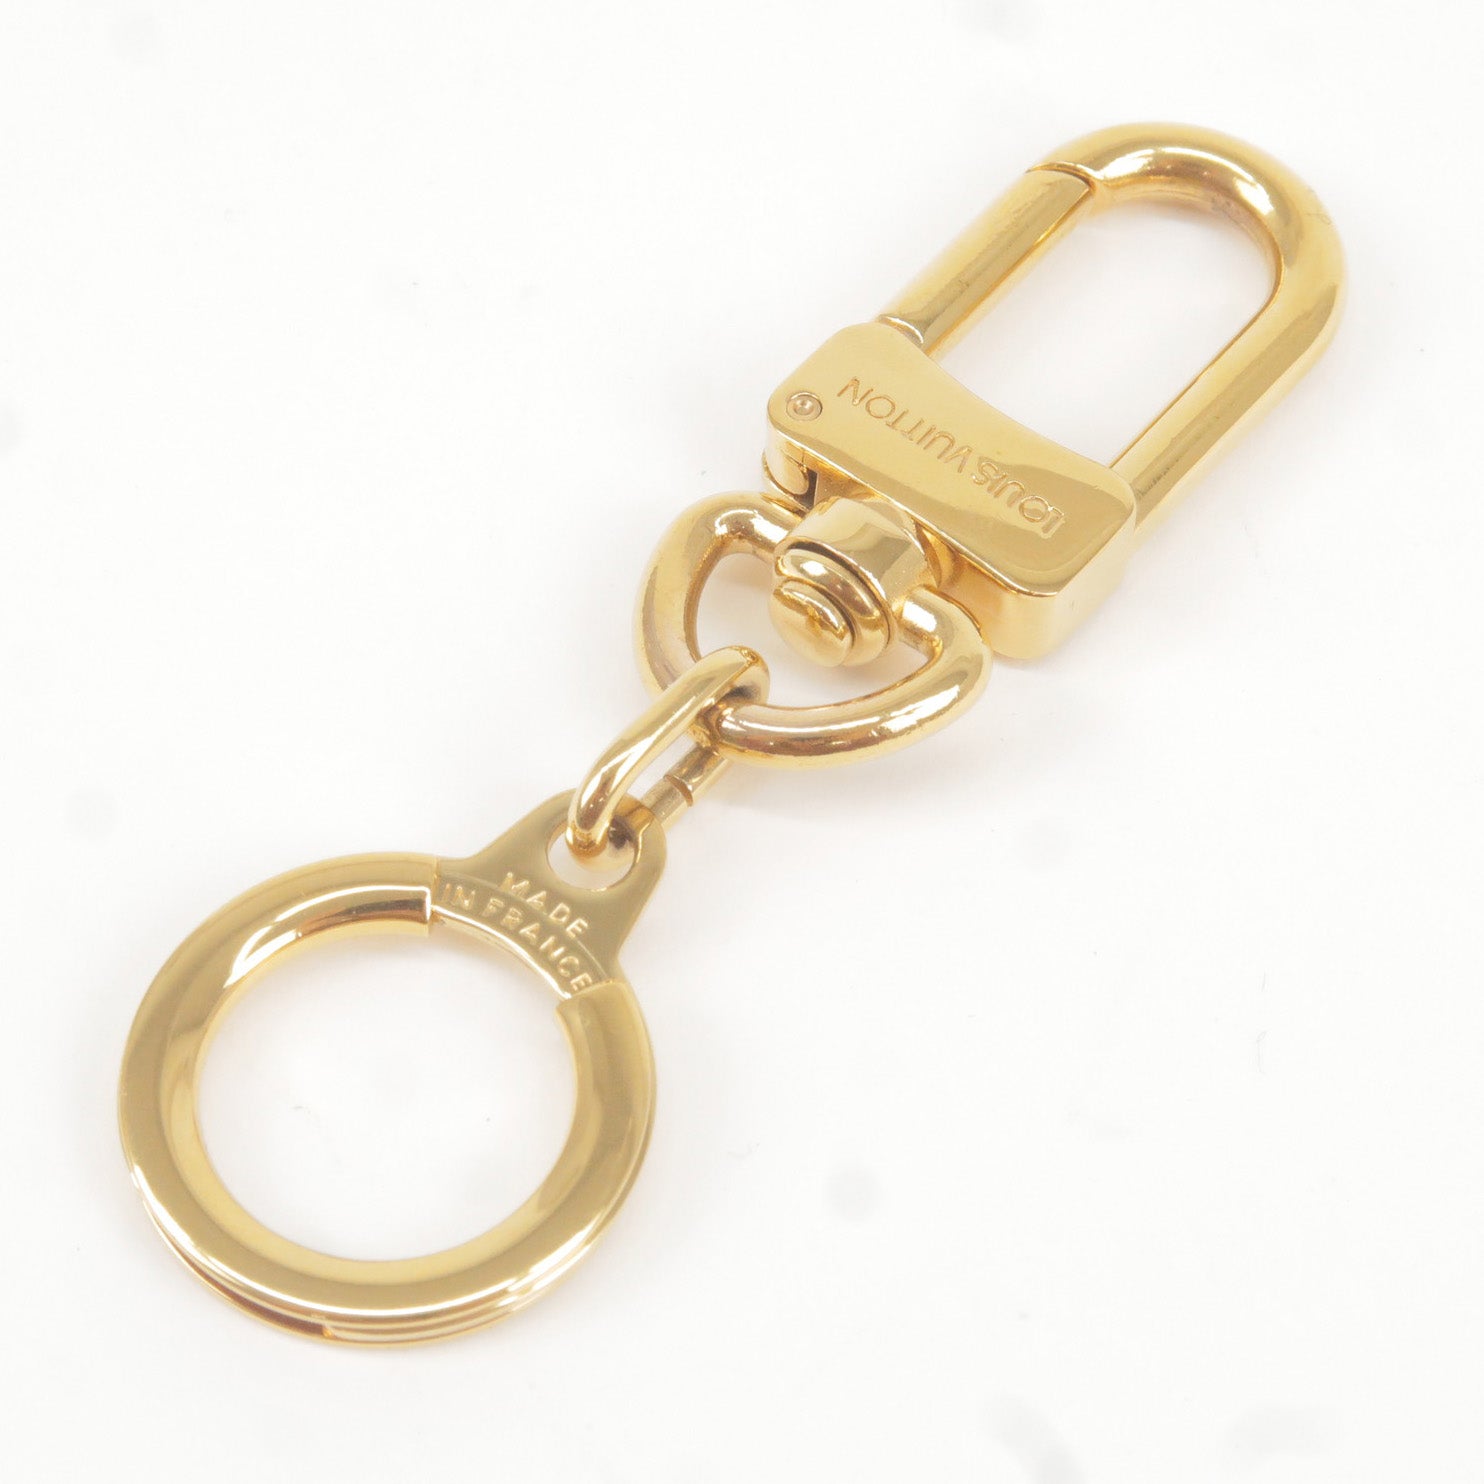 Louis - Charm - Key - Vuitton - Chain - Ano - M62694 – dct - Cles -  ep_vintage luxury Store - Gold - louis vuitton architecture and interiors  book by rizzoli - Key